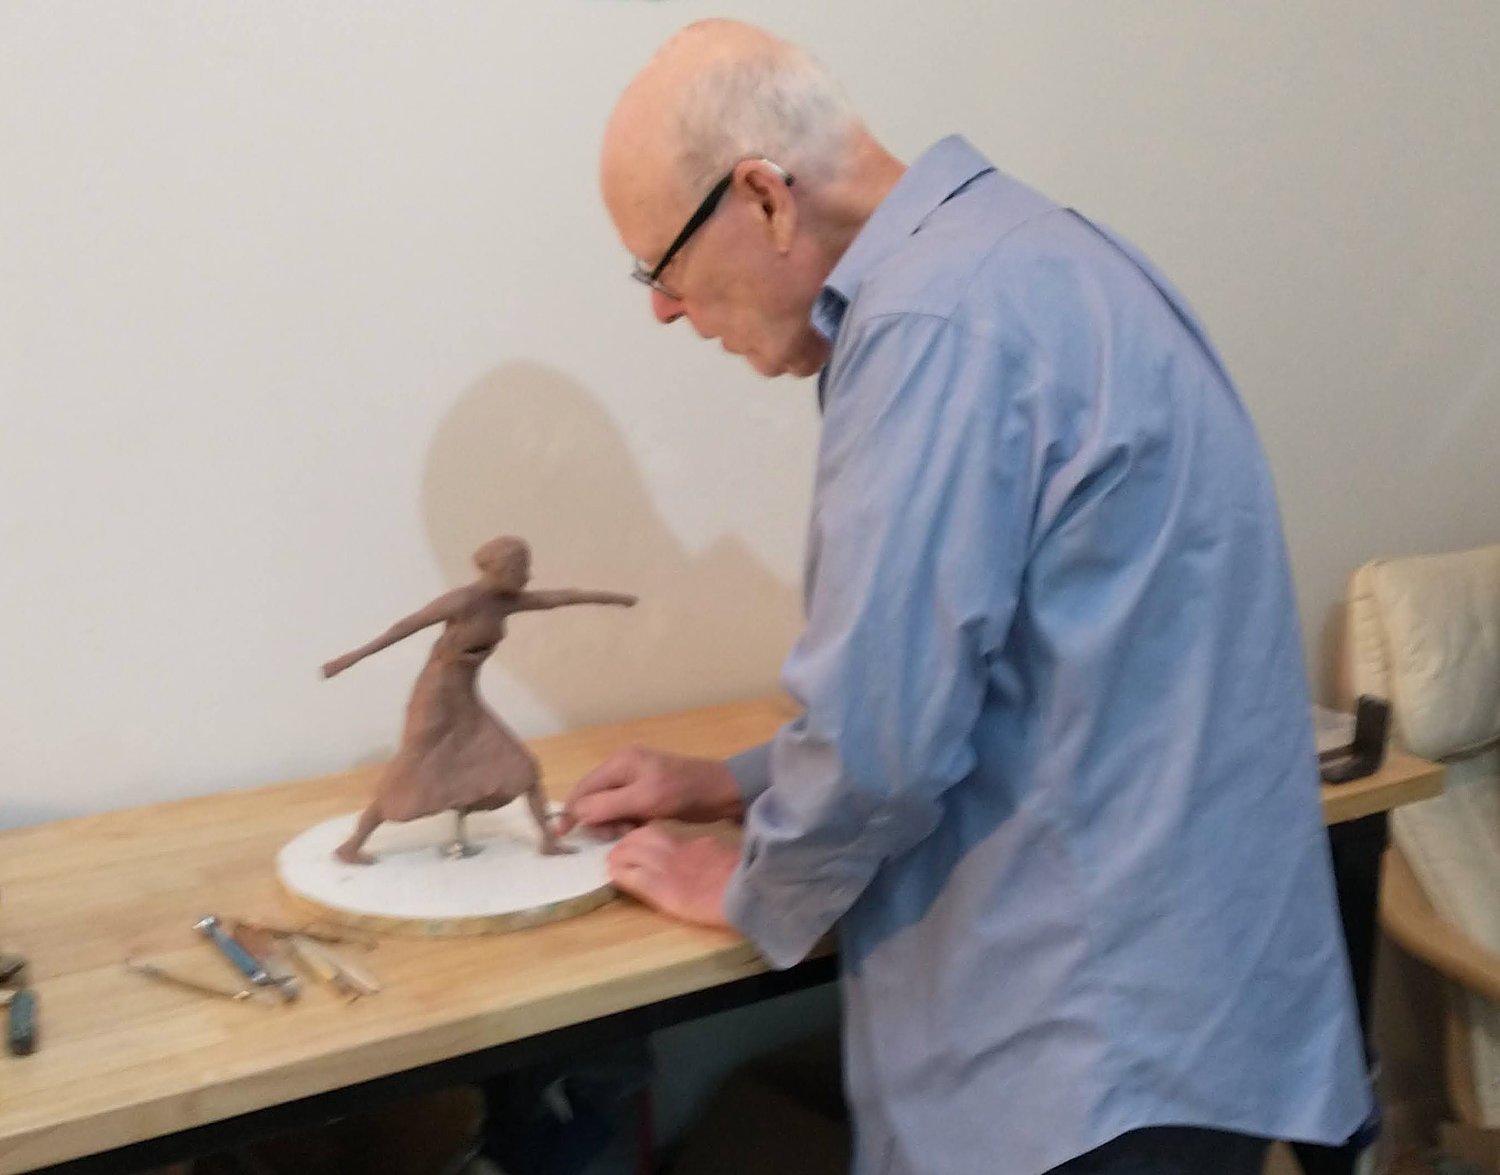 Desmond McRory is at work sculpting “Democracy Sounds
the Alarm.”